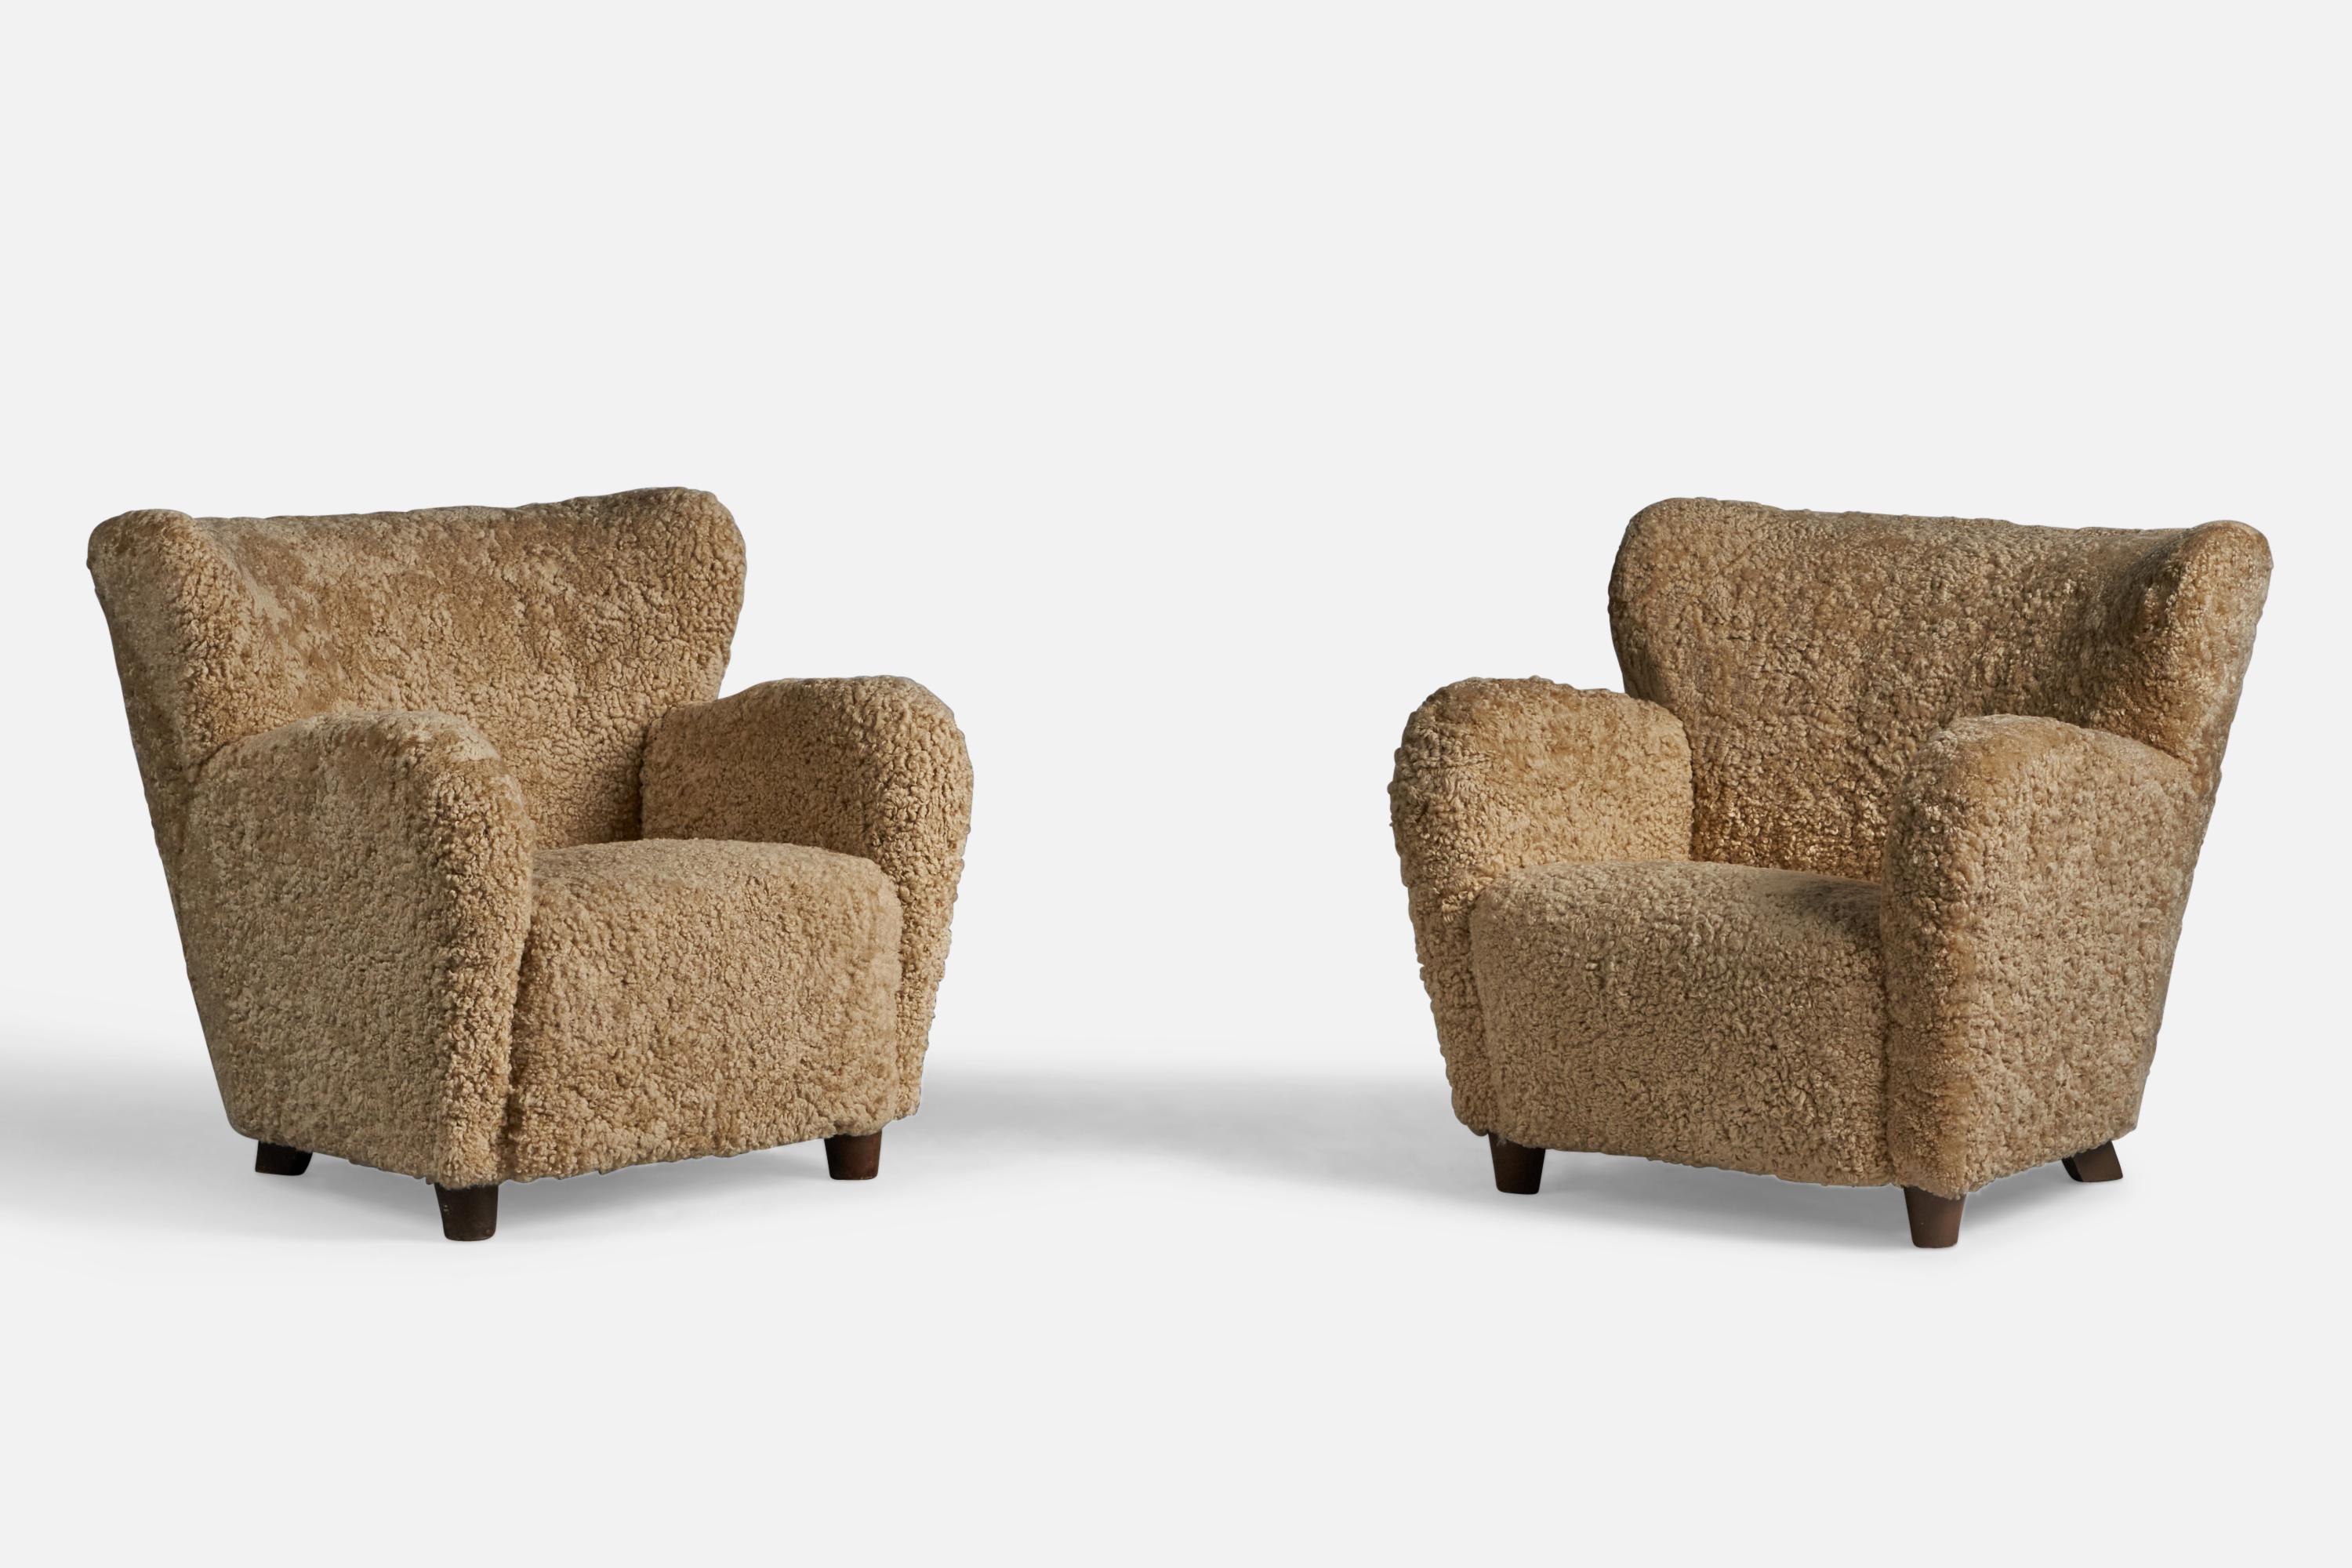 A pair of organic beige shearling and stained wood lounge chairs, designed and produced in Finland, 1940s.

15.5